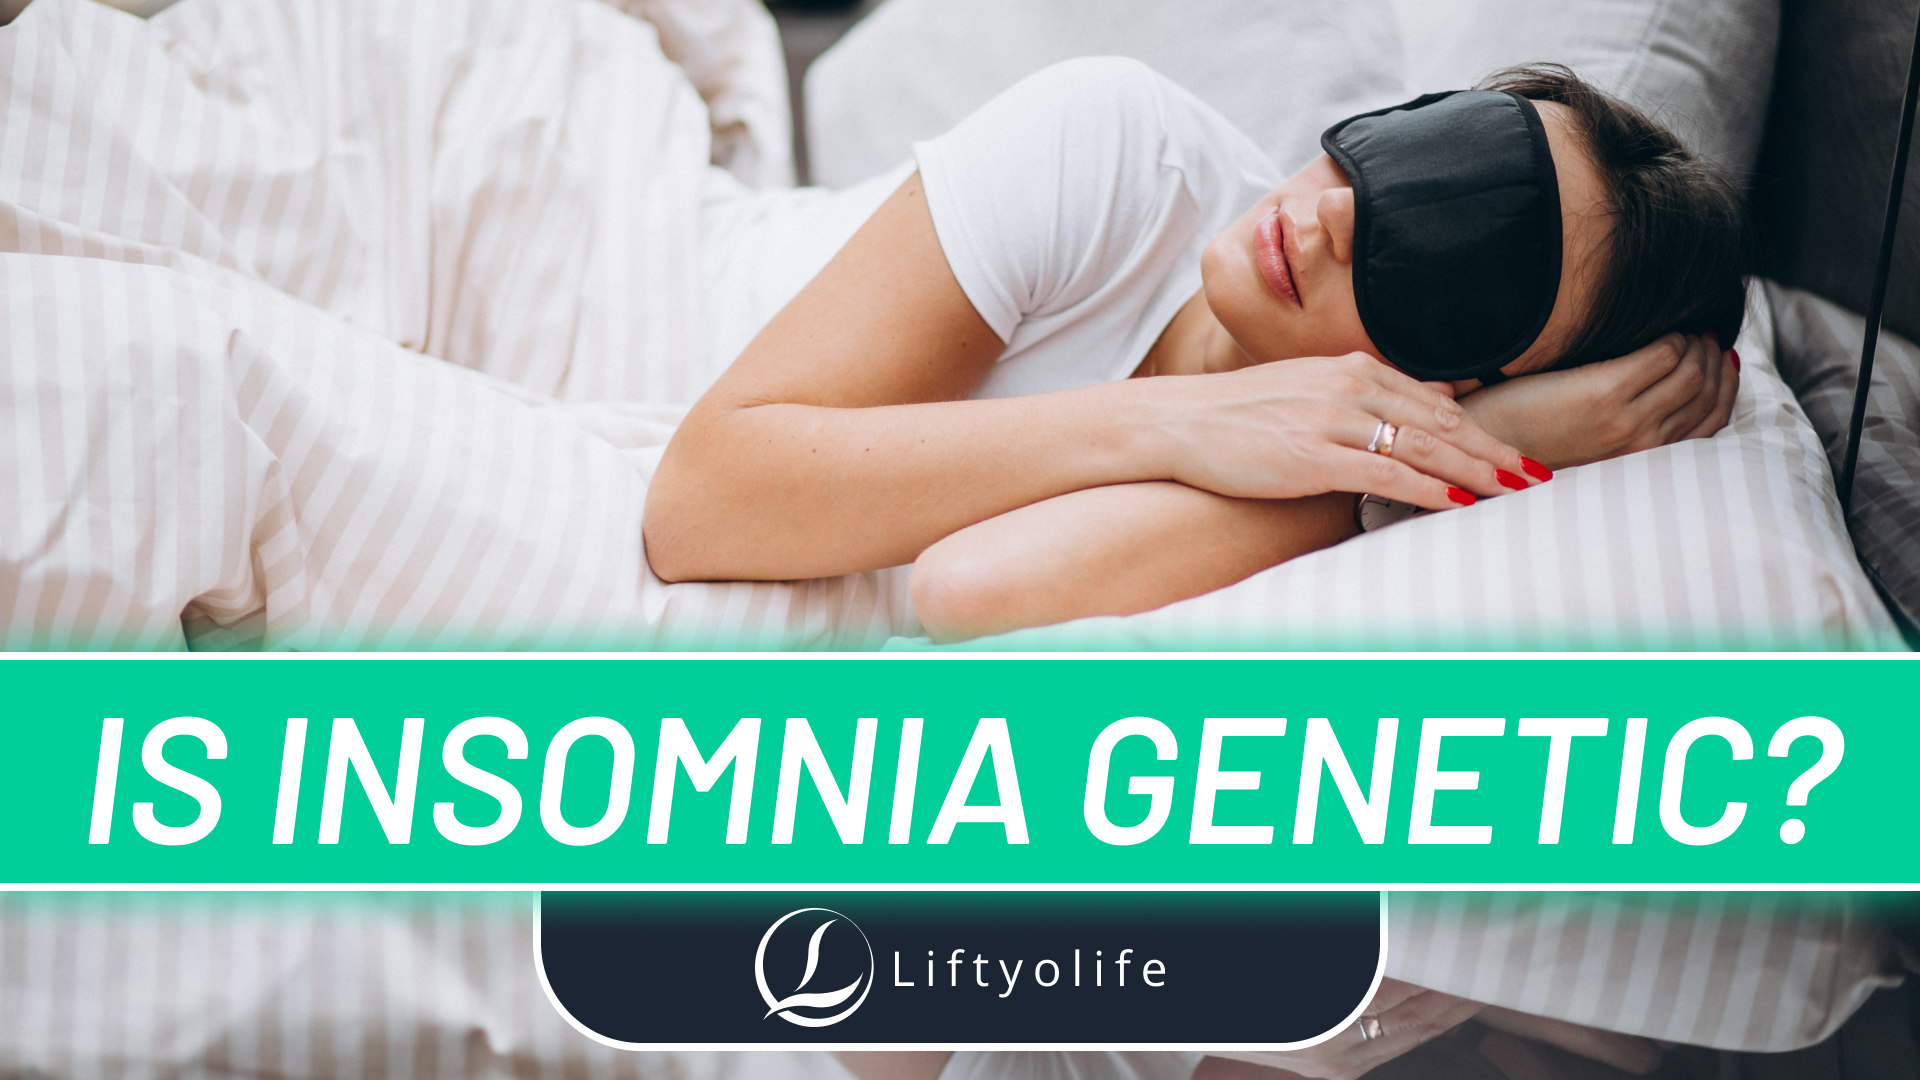 Is Insomnia Genetic? 5 Minutes To Figure Out